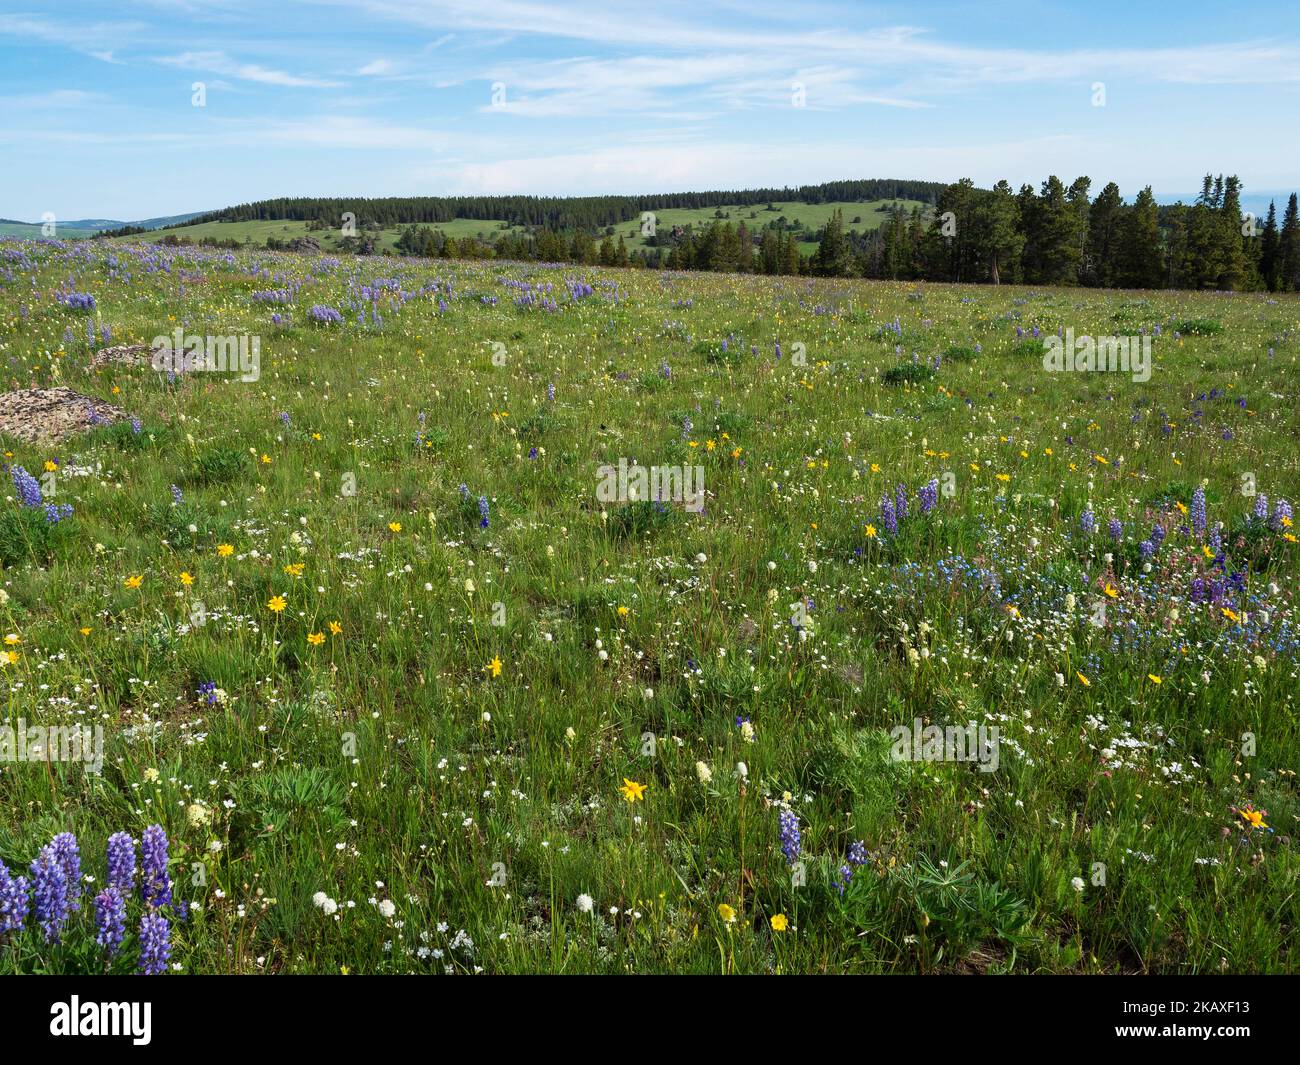 Alpine meadow beside Highway 14 Scenic Byway, Bighorn National Forest, Wyoming, USA, July 2019 Stock Photo